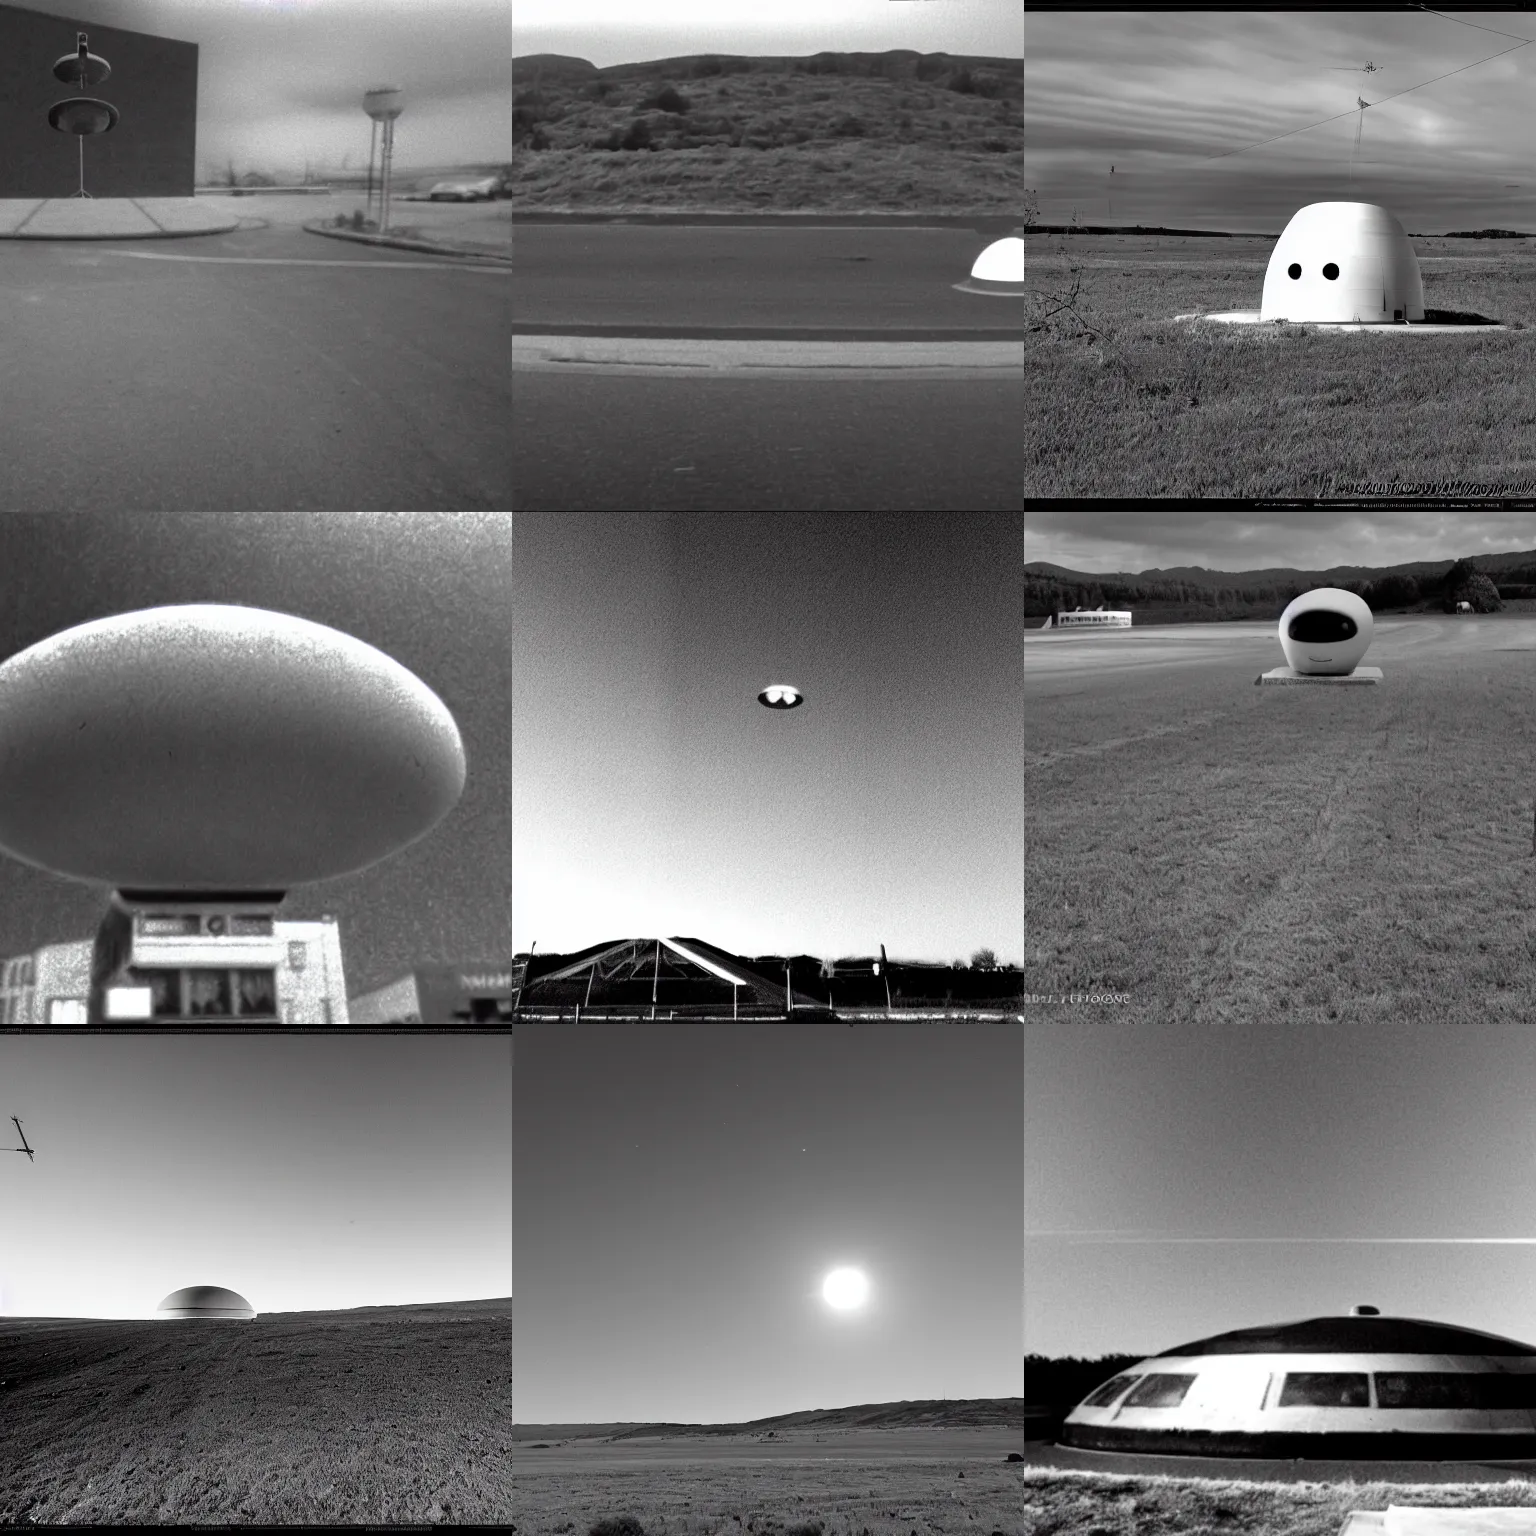 Prompt: photography of rosewell ufo, x - files, black & white, blurry, security cam footage, found footage